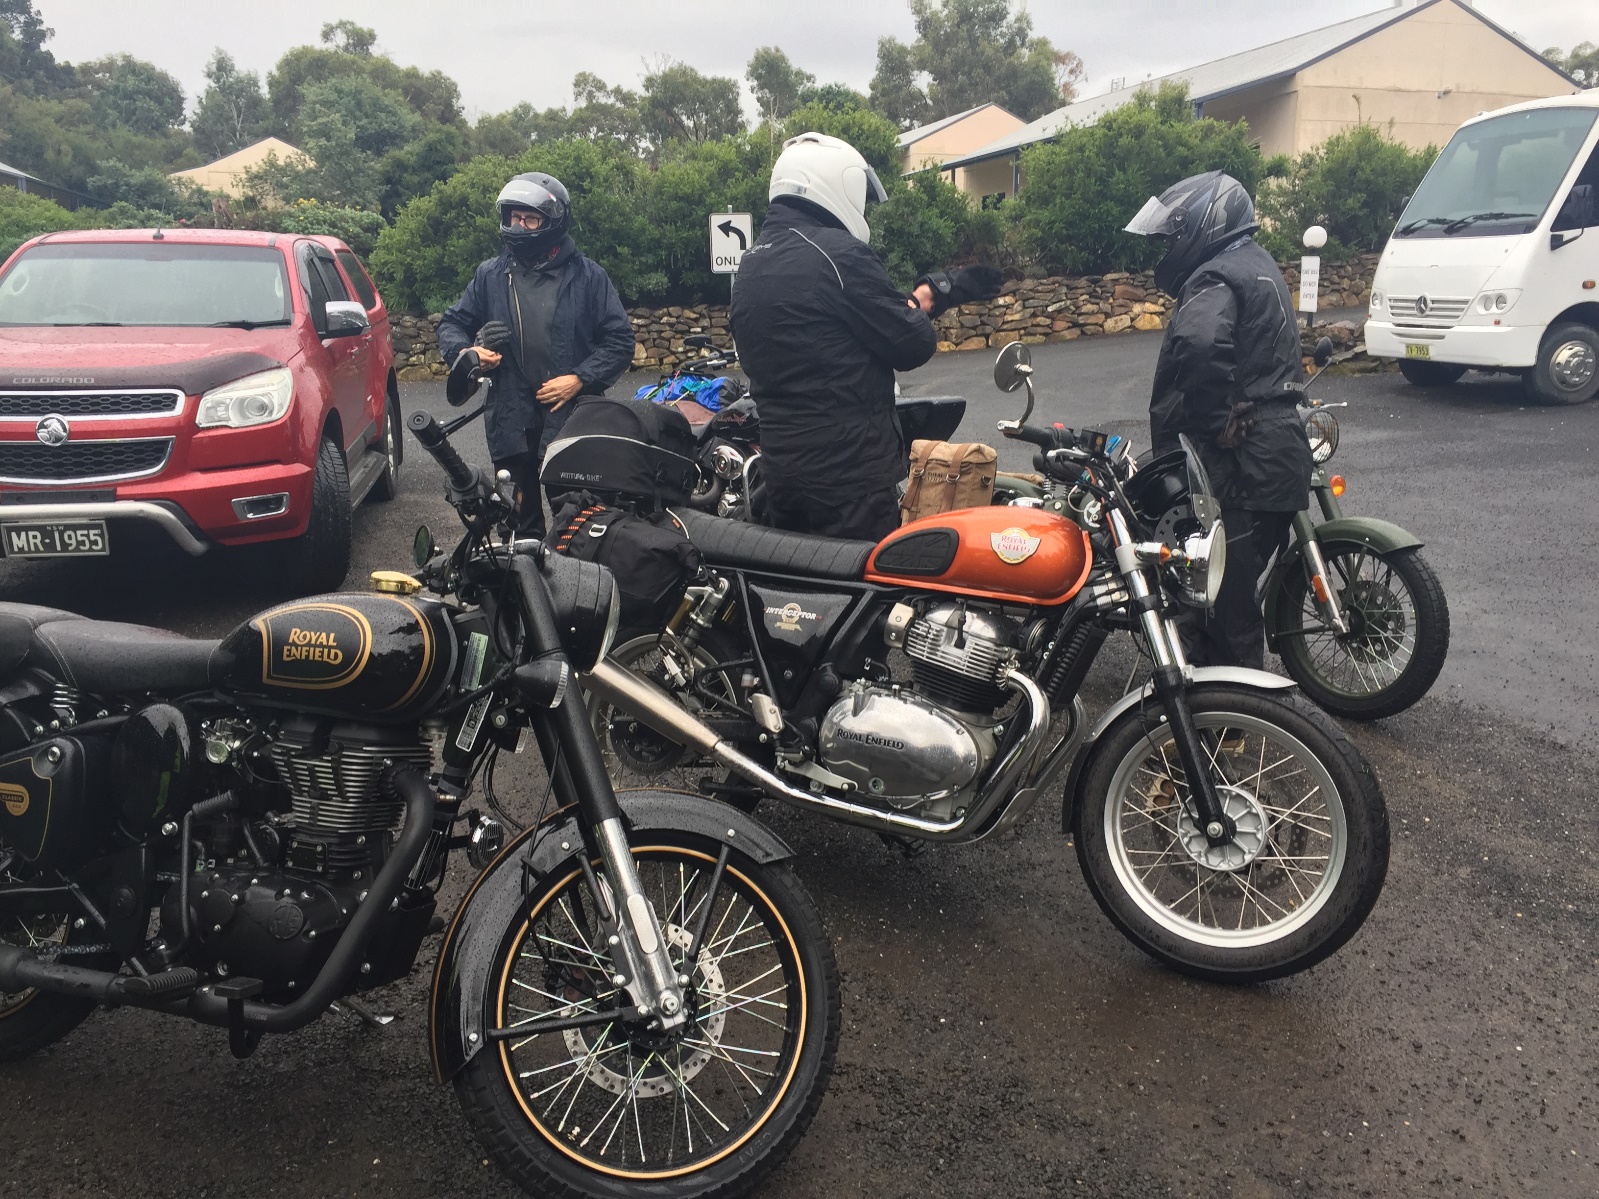 A group of men standing next to motorcycles

Description automatically generated with low confidence